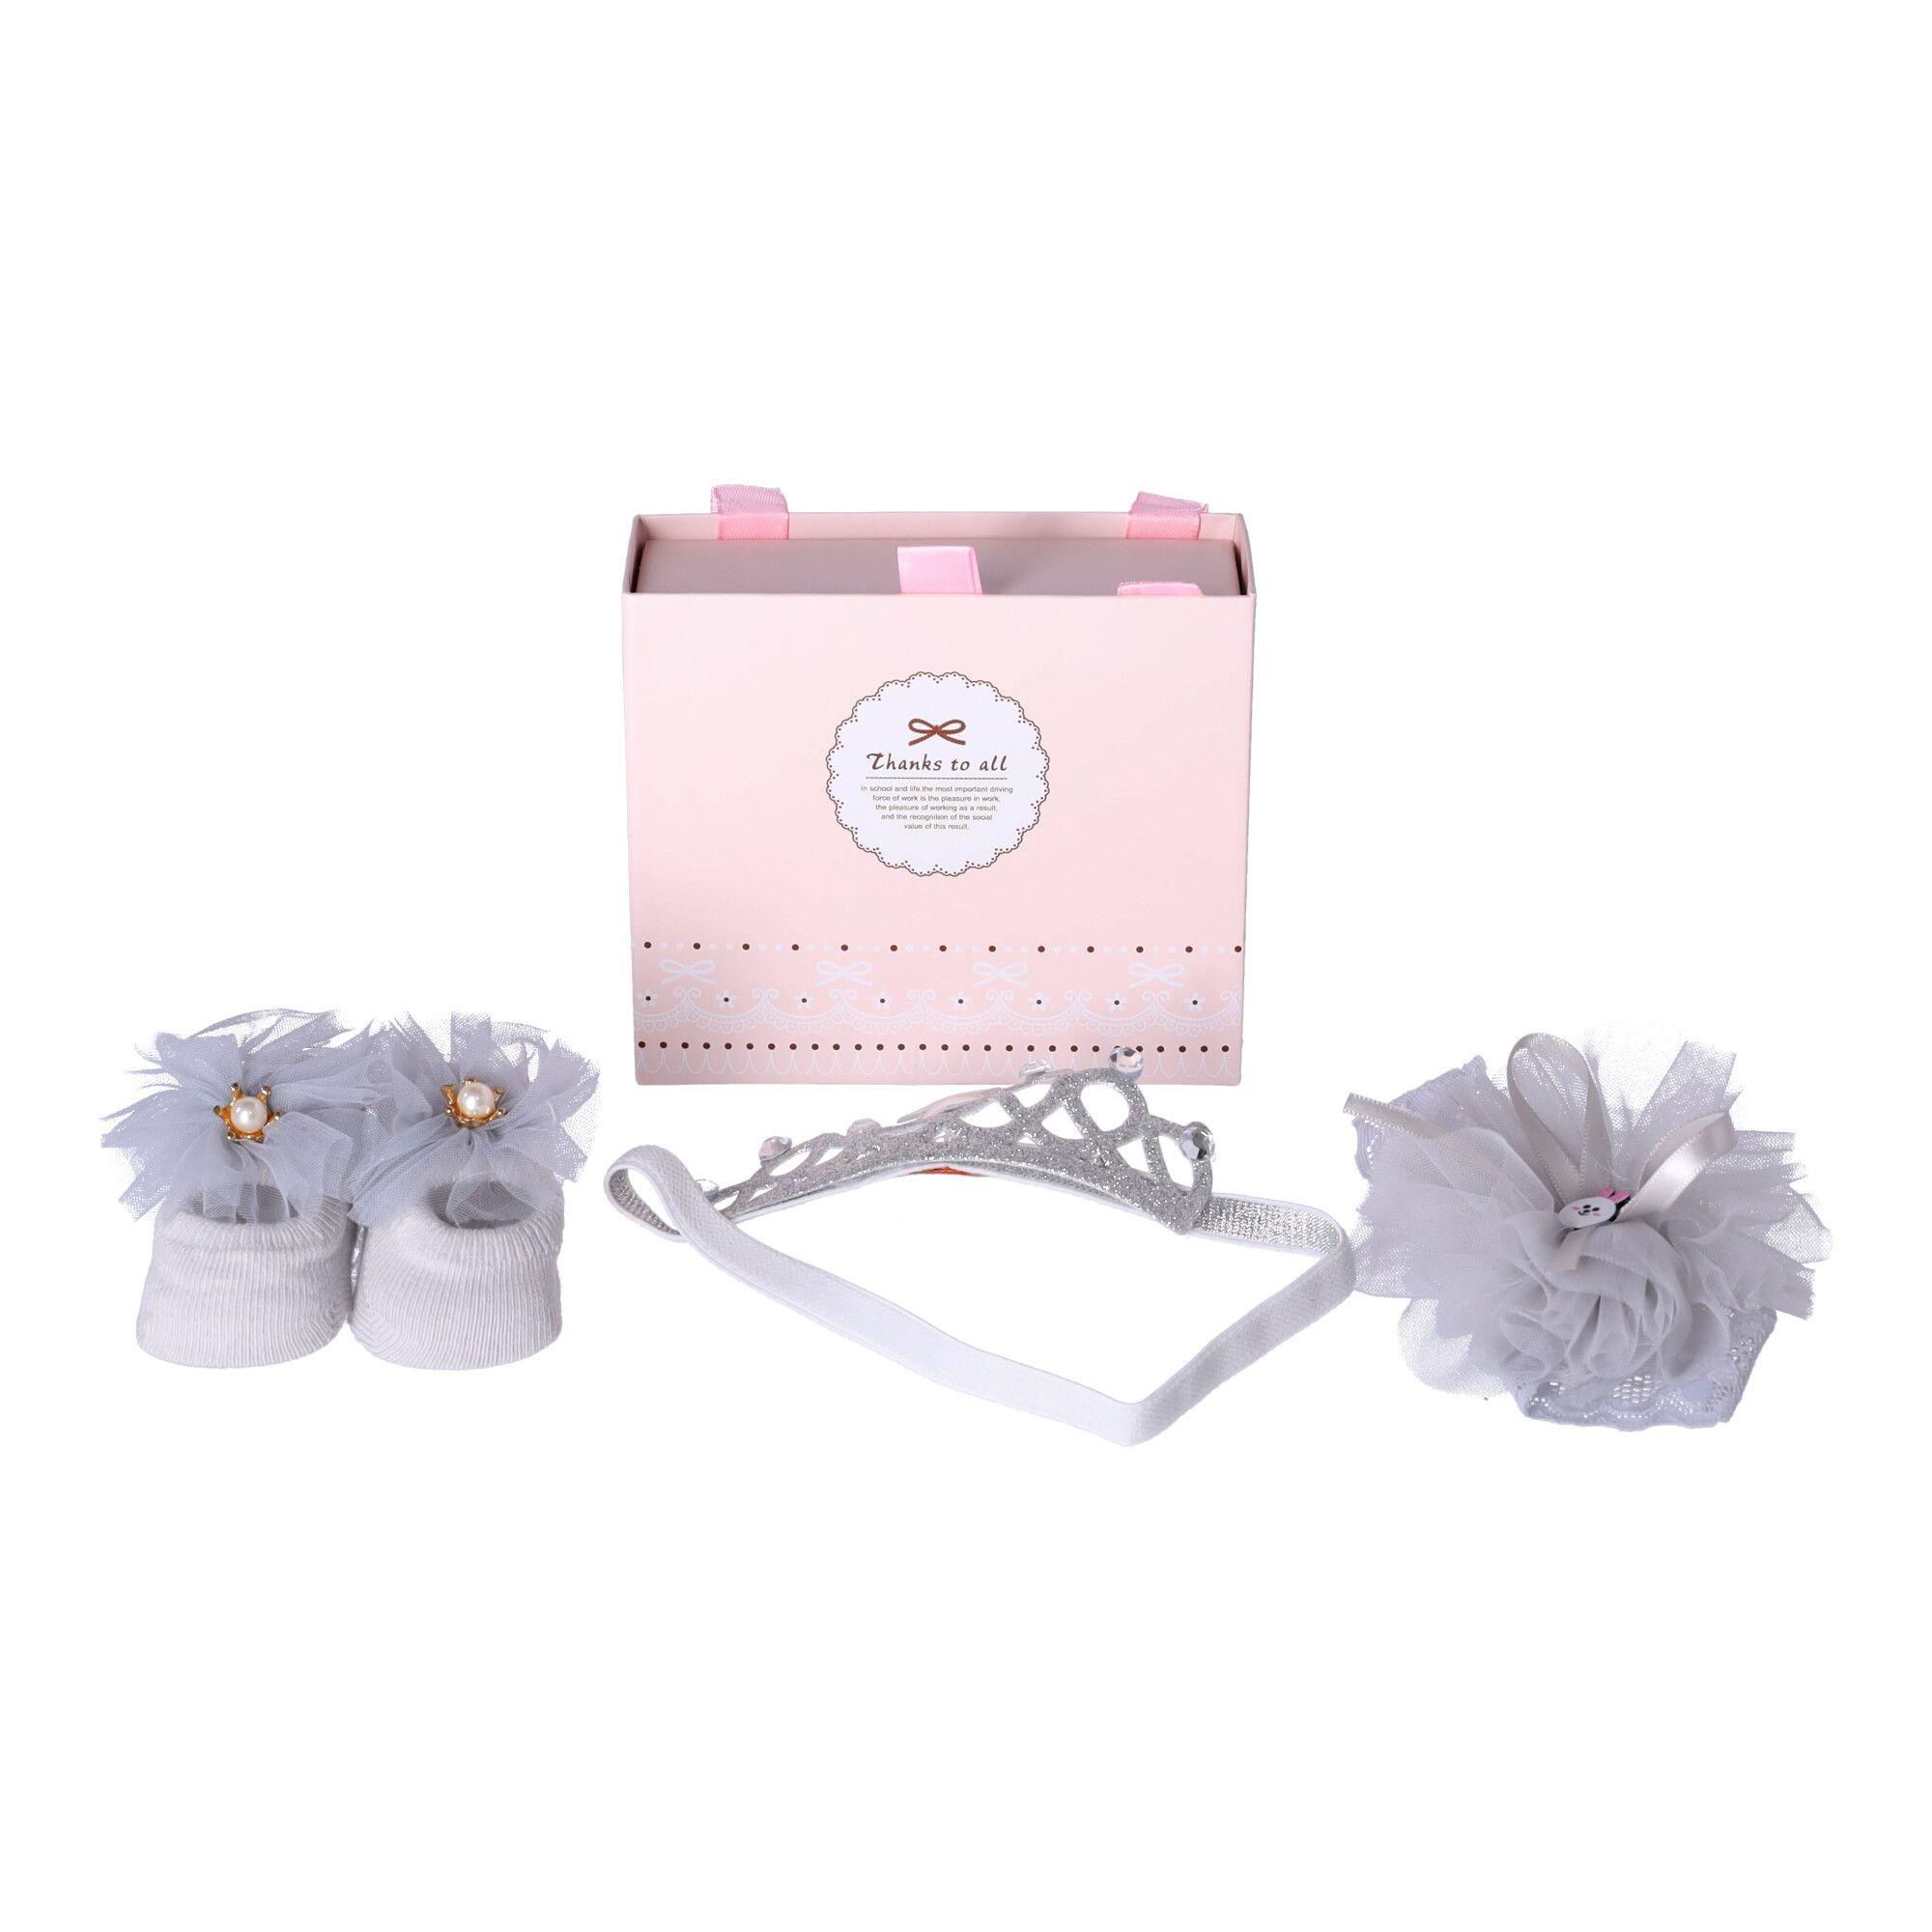 Gift set 3in1 for a newborn baby - light grey